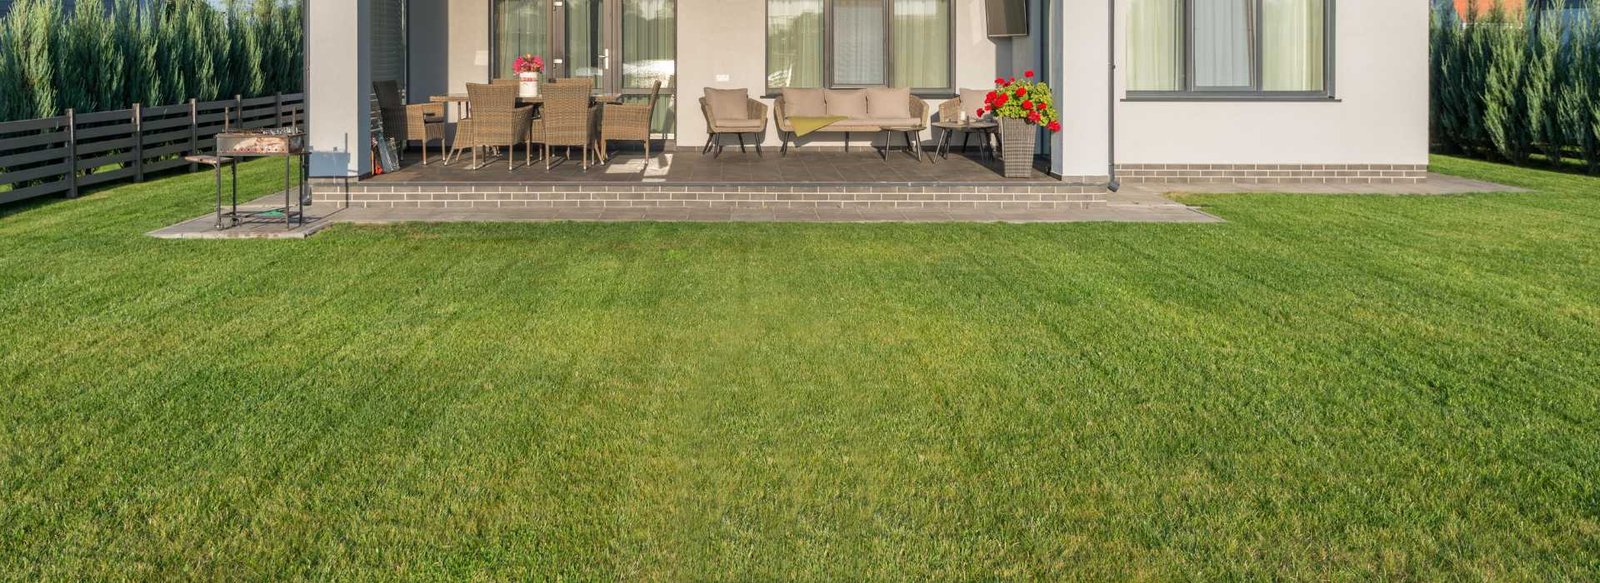 what does lime do for grass? - Urban Landscape & Construction Urban Landscape & Construction